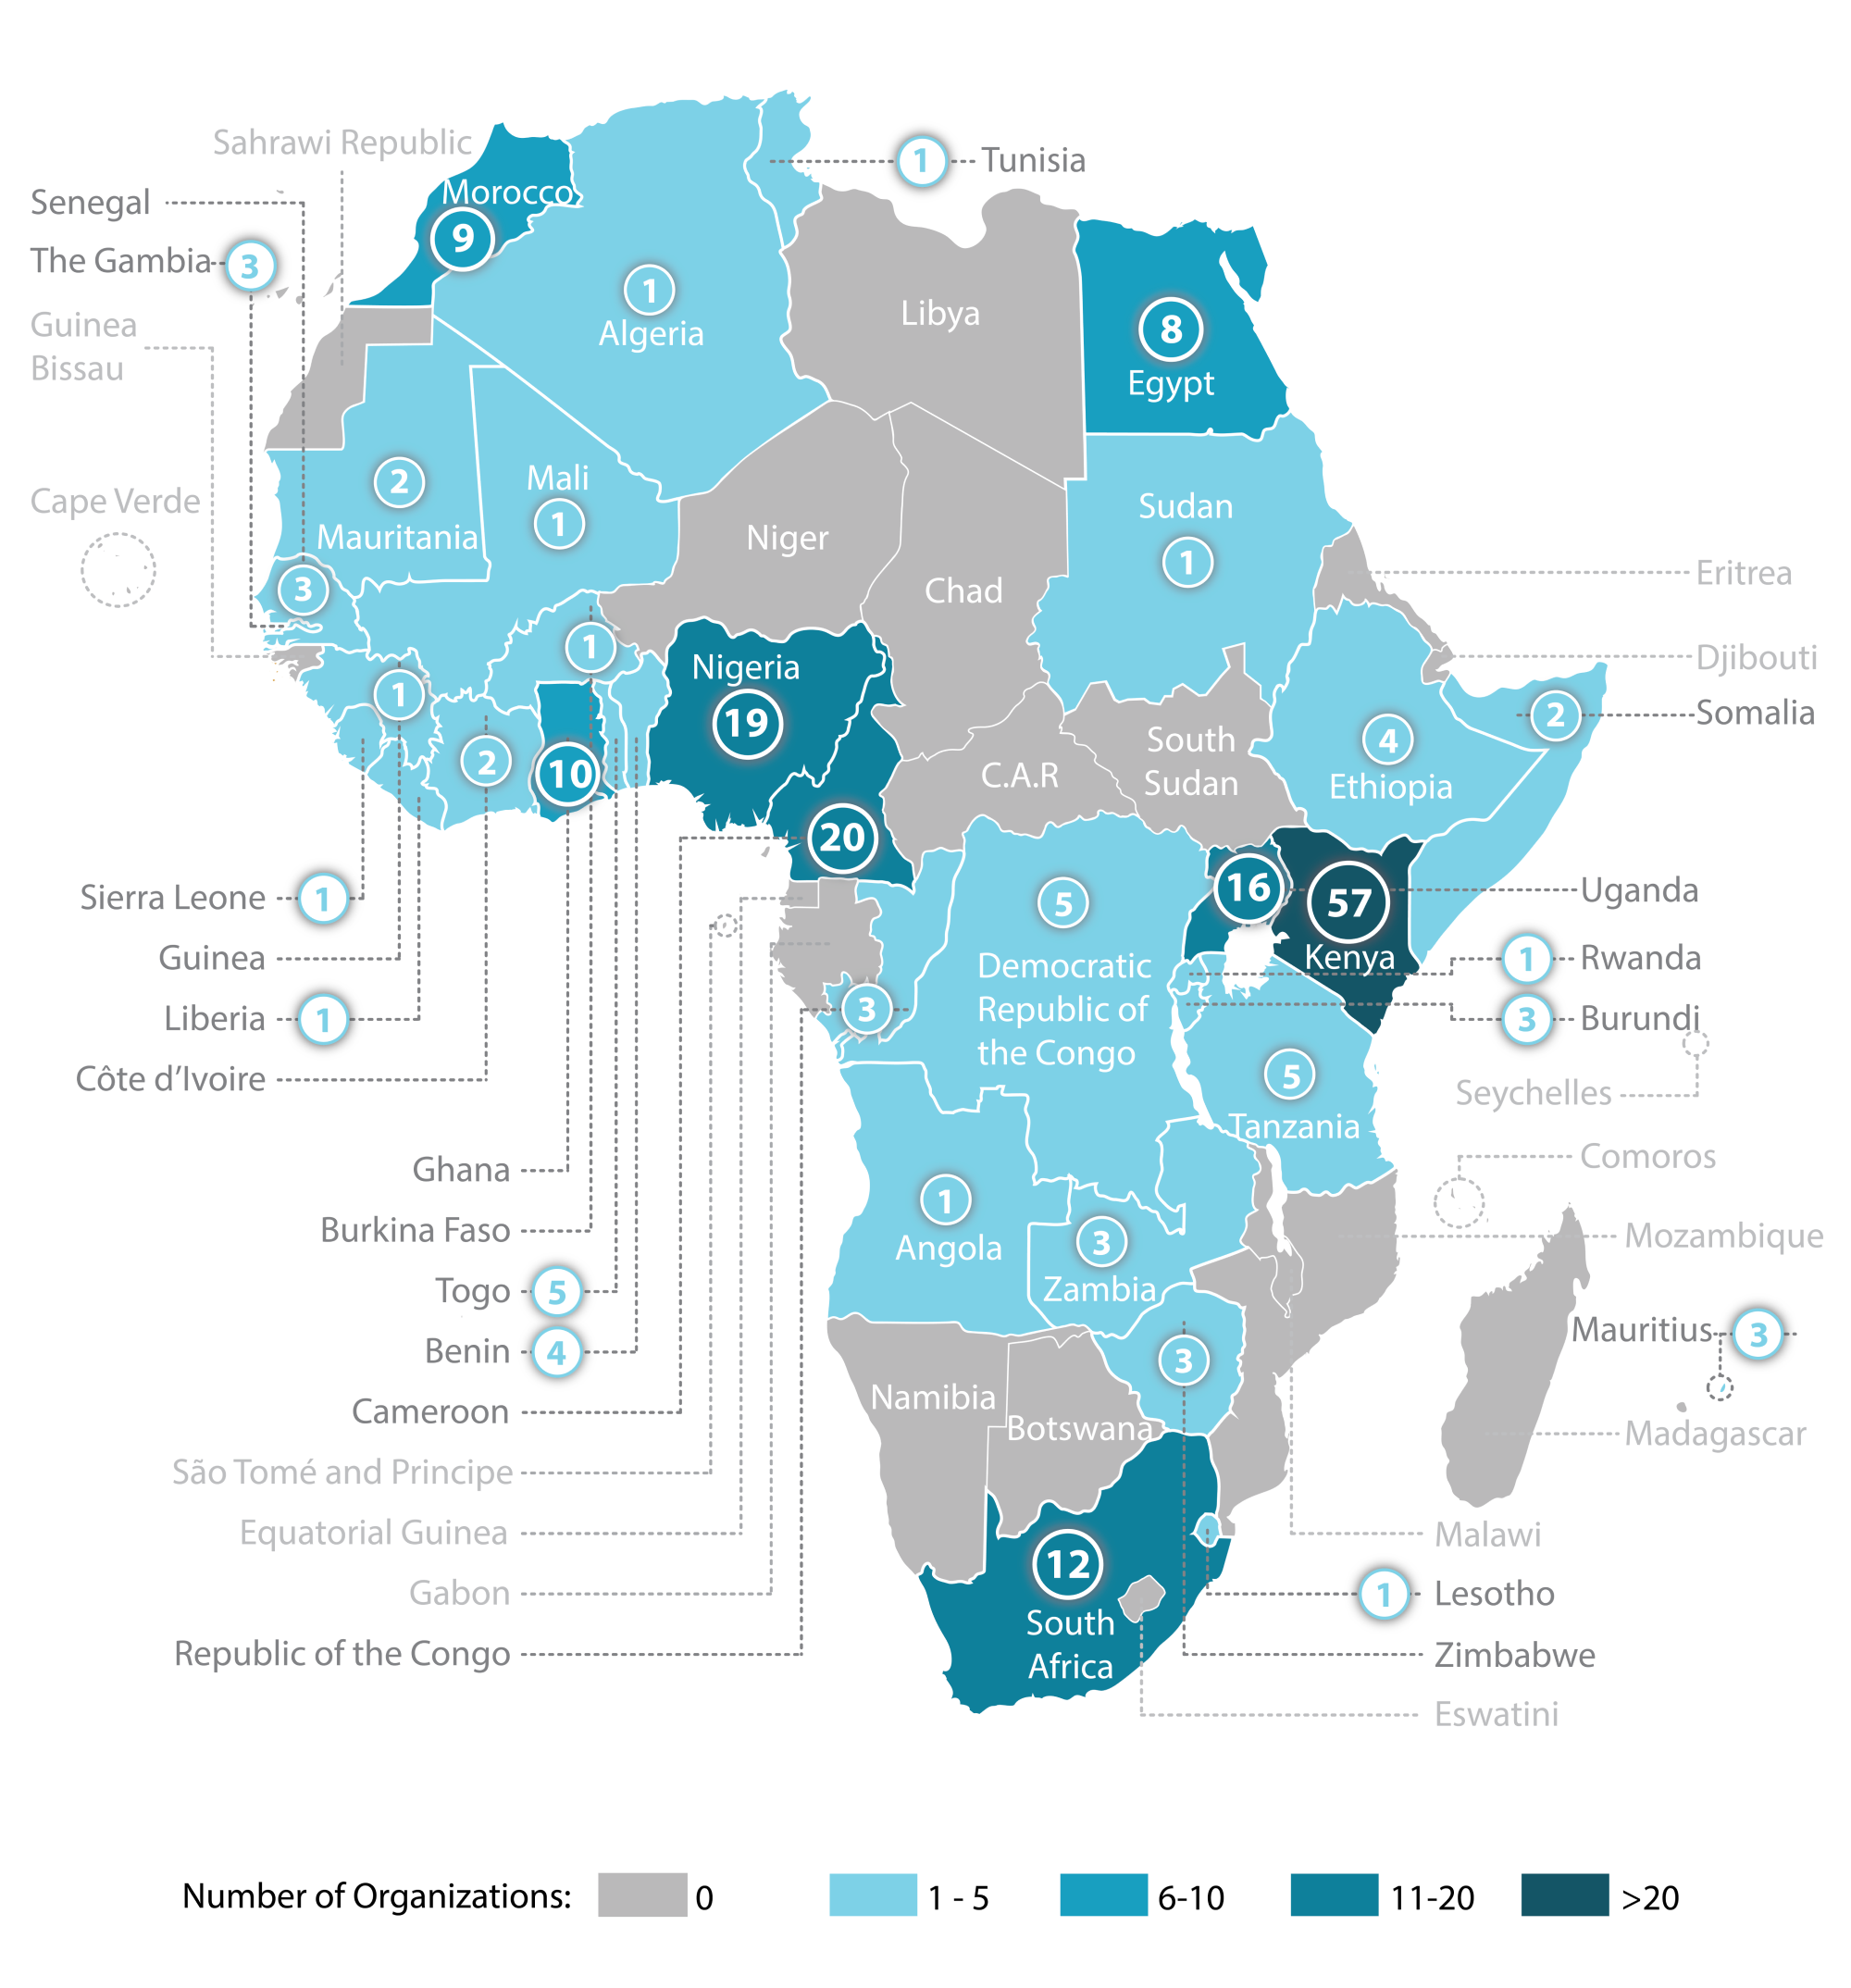 Map of organizations accredited with UNEP in Africa